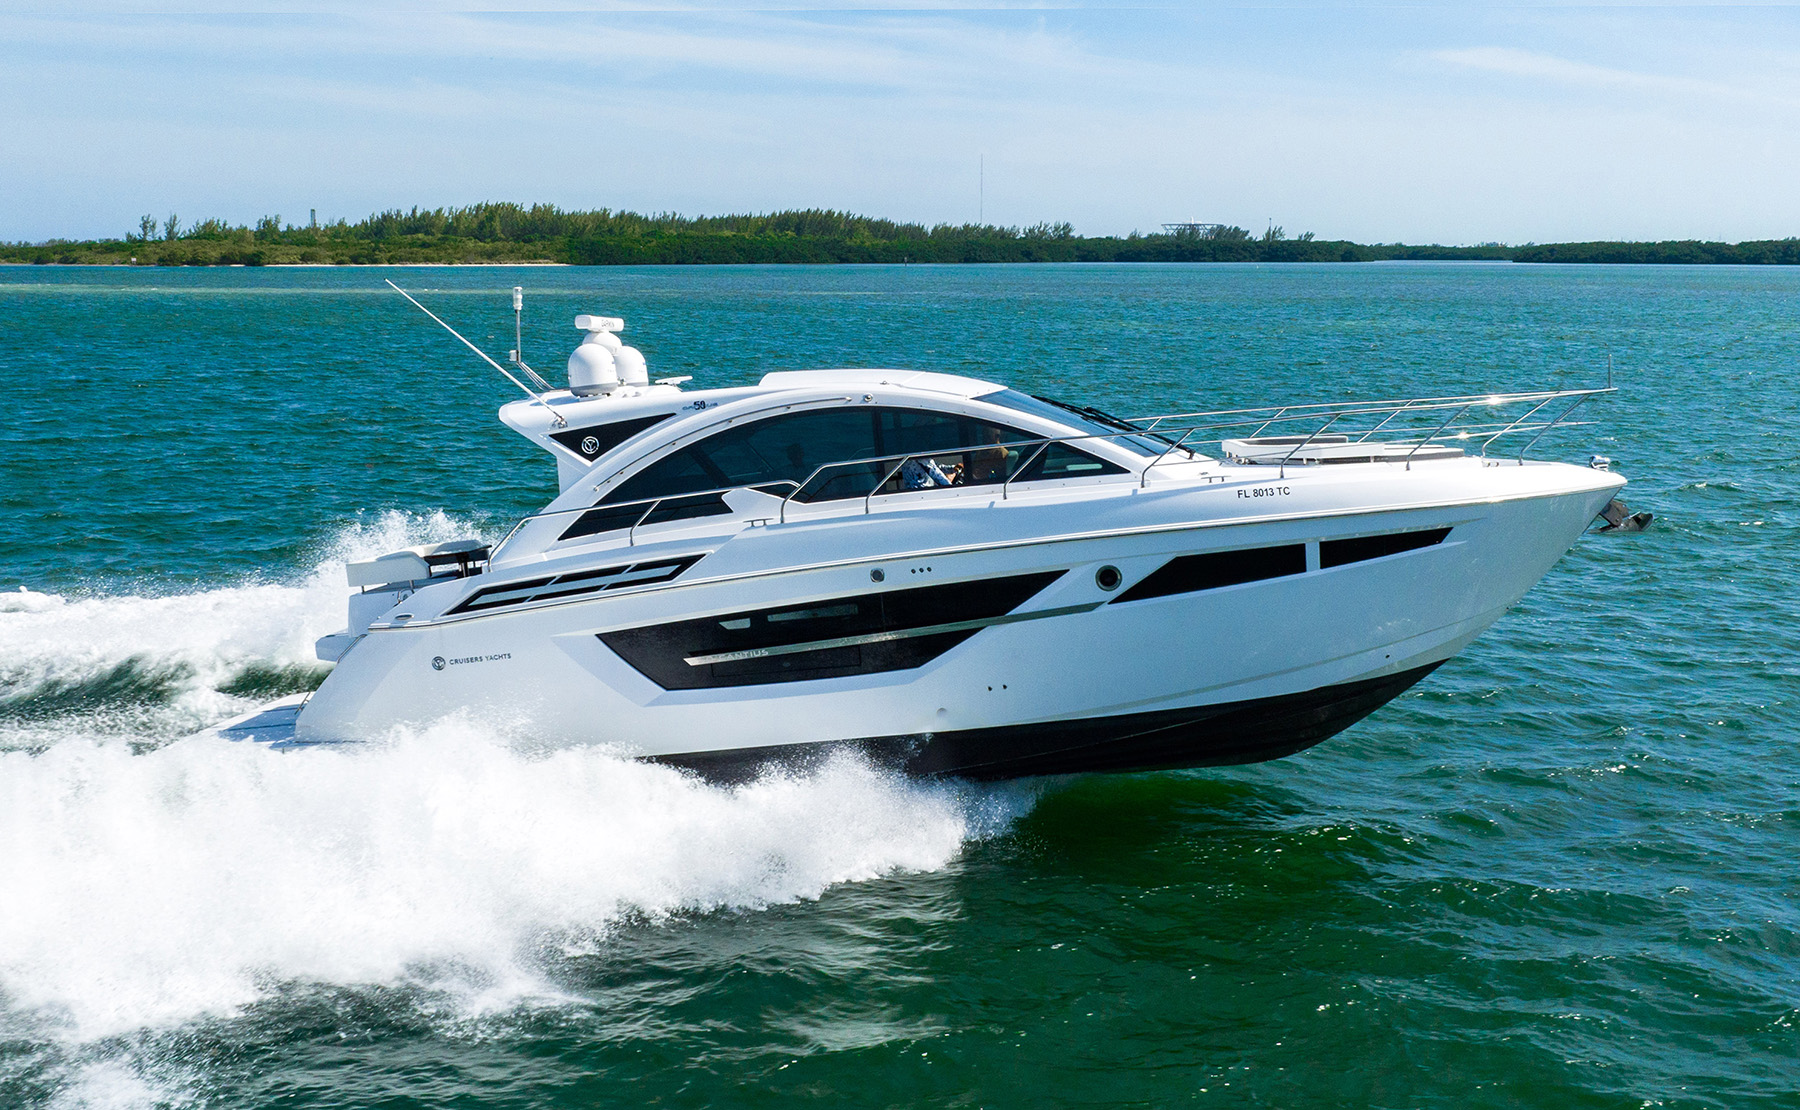 CANTIUS 50 specs with detailed specification and builder summary